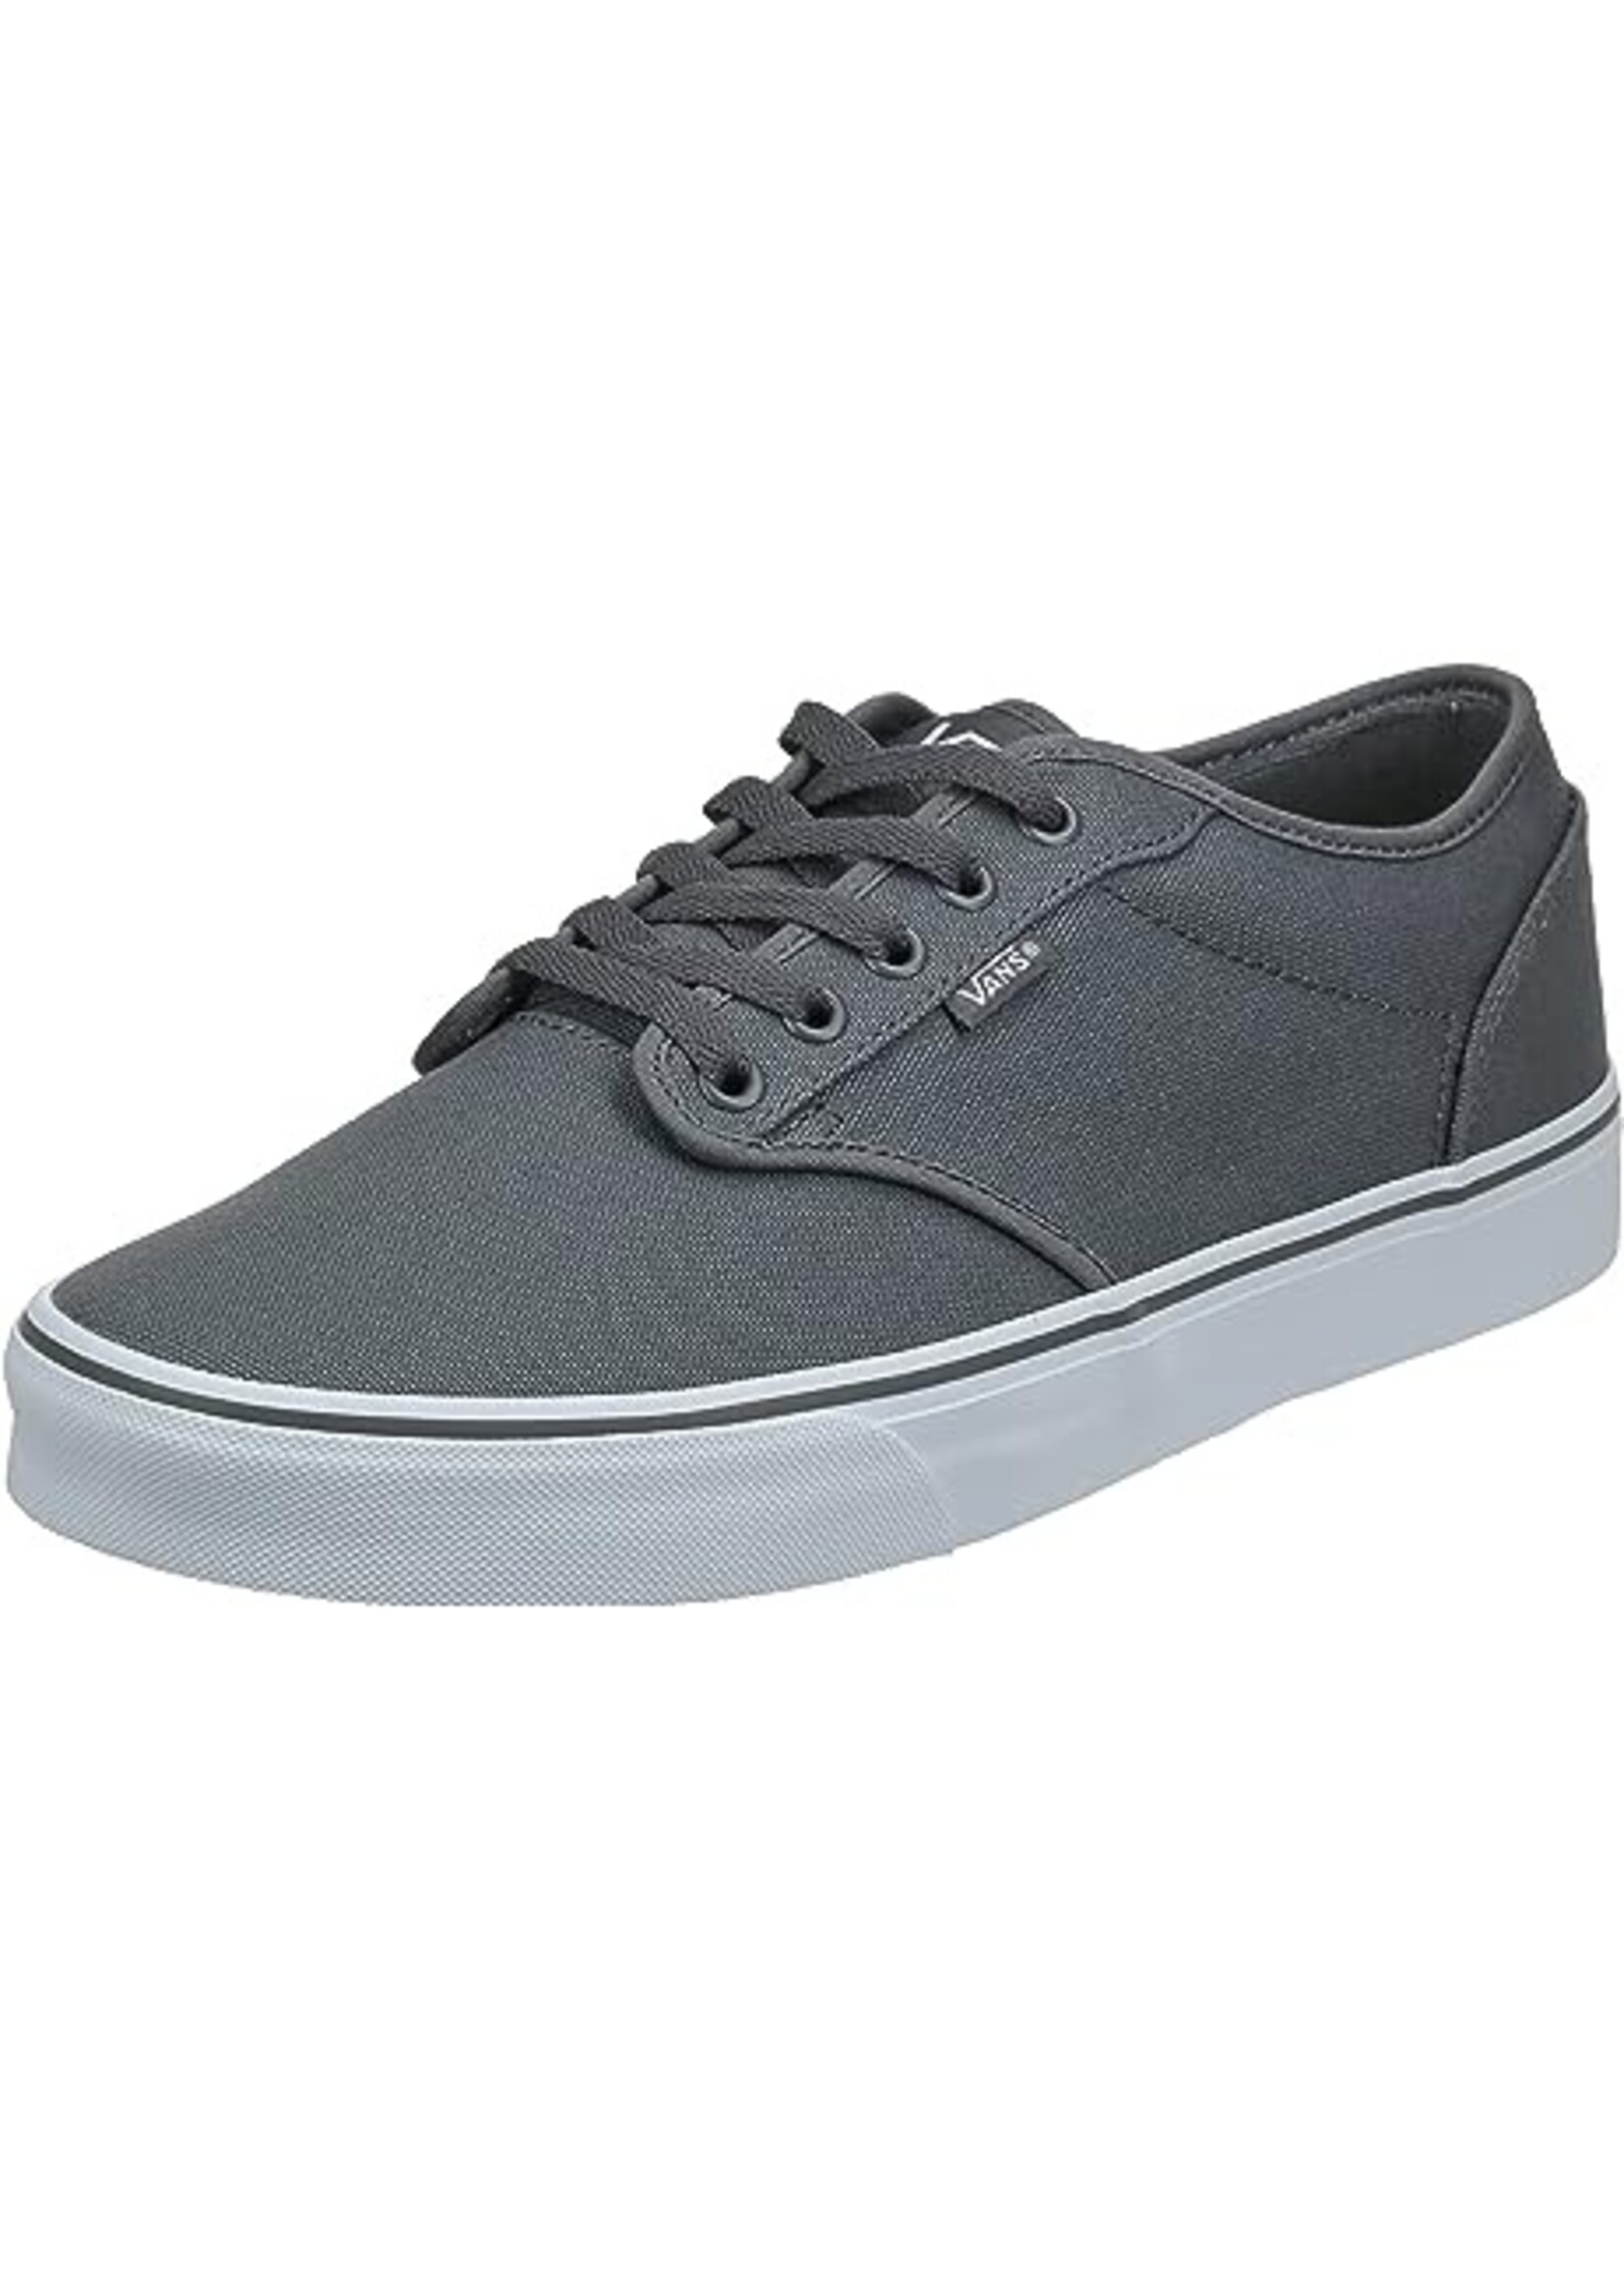 Vans MN ATWOOD VN000TUY4WV1